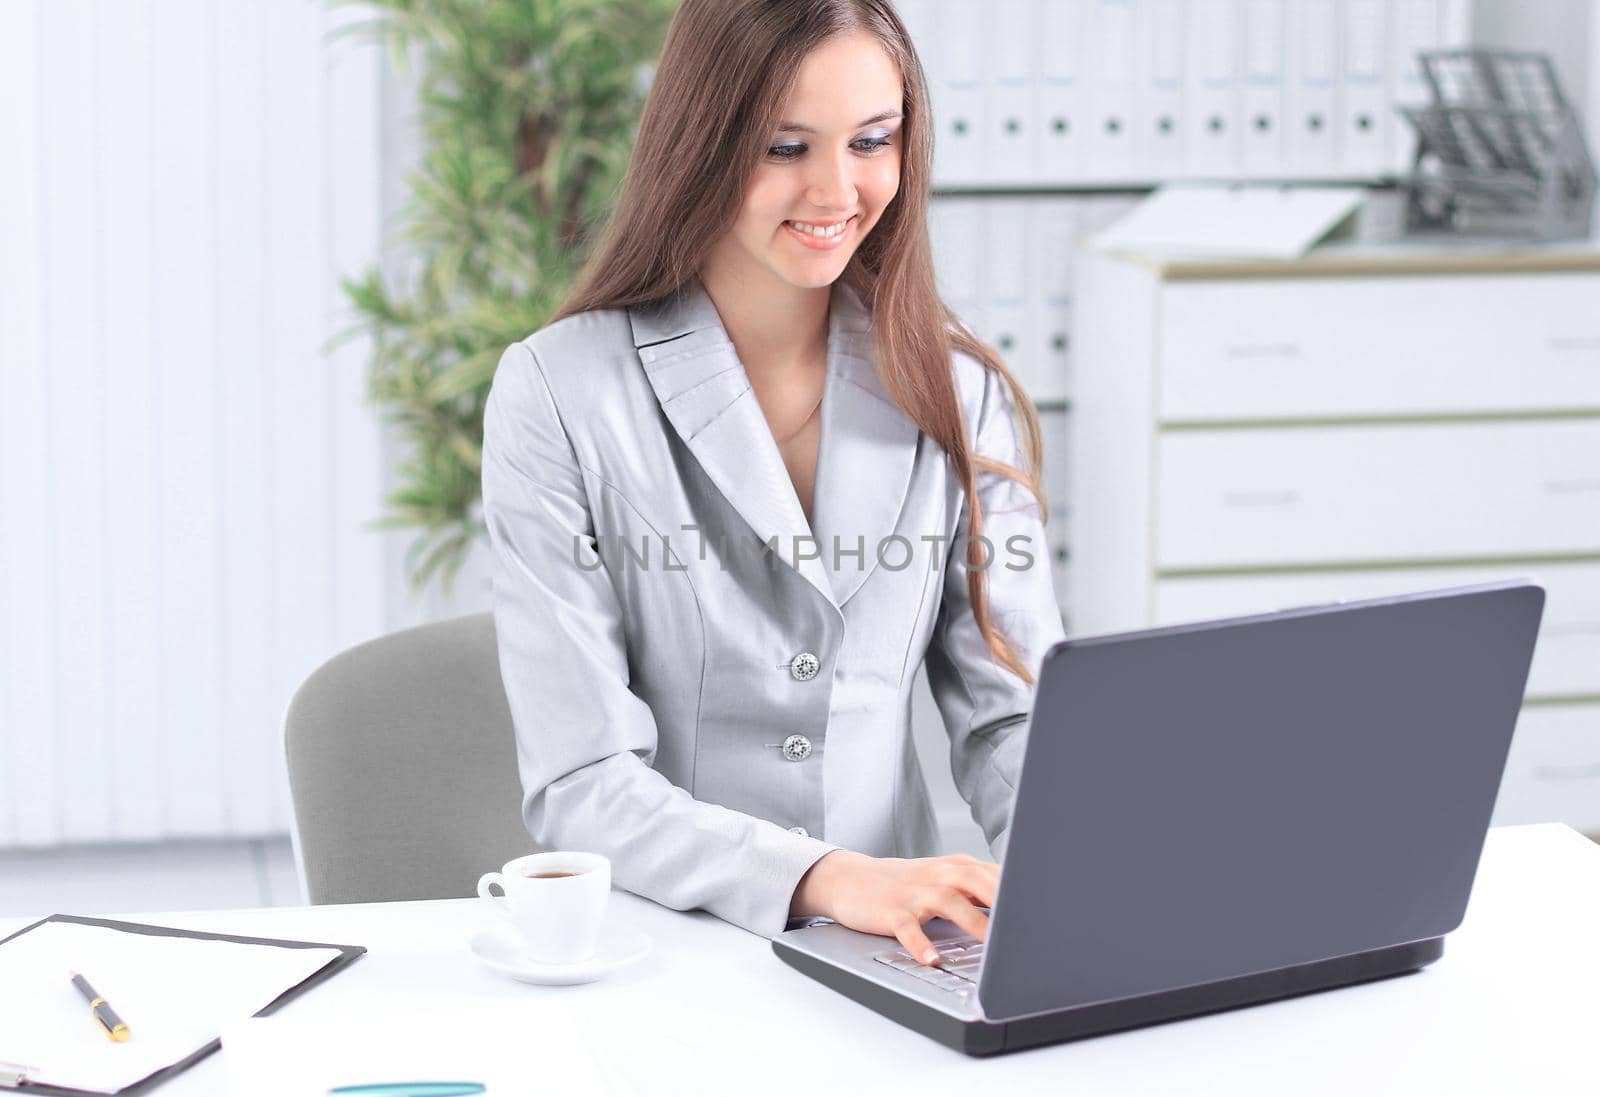 female assistant sitting at her Desk in the office.photo with copy space.